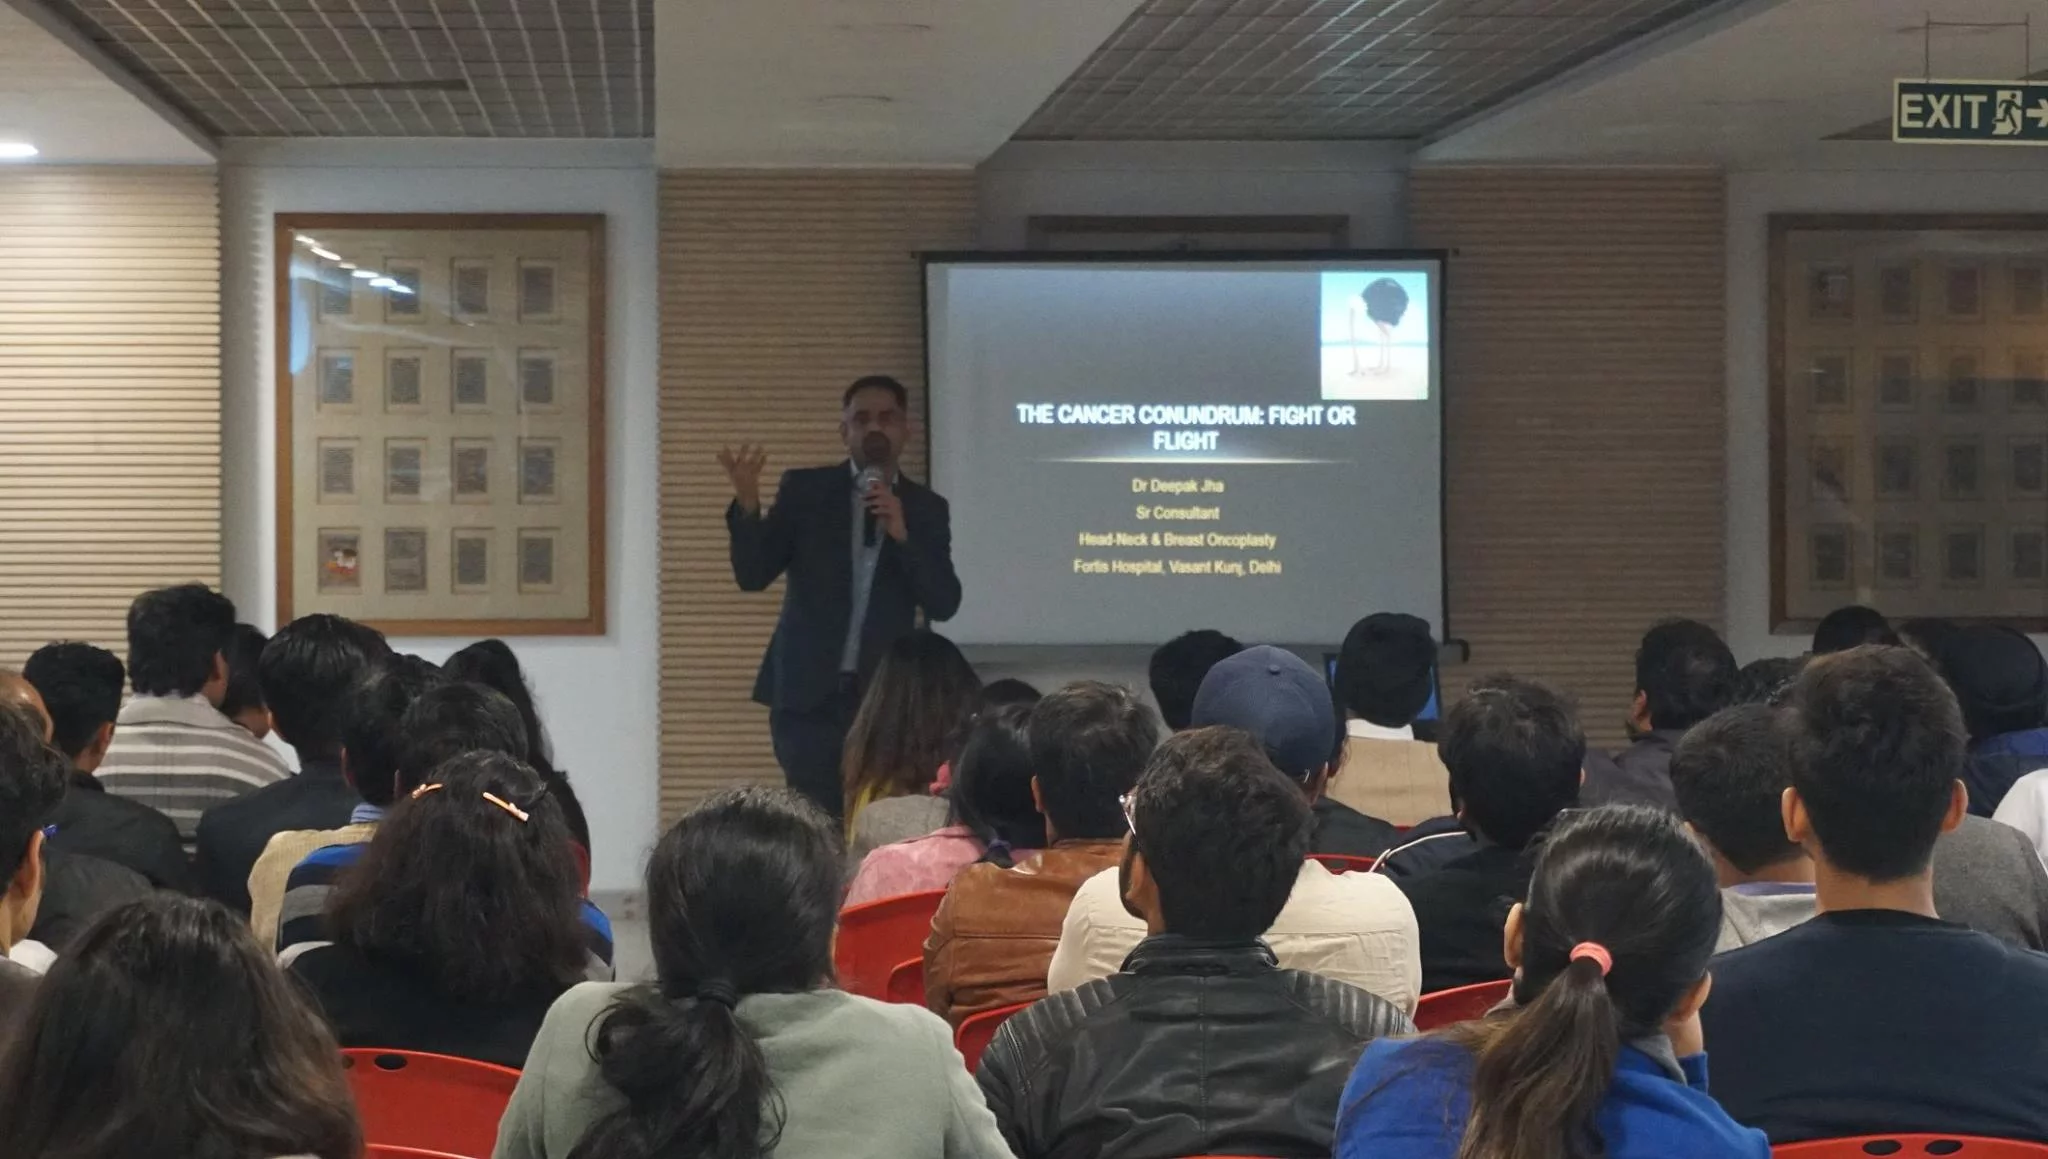 YouWeCan visits TimesJobs, Holds Cancer Awareness Workshop for Employees